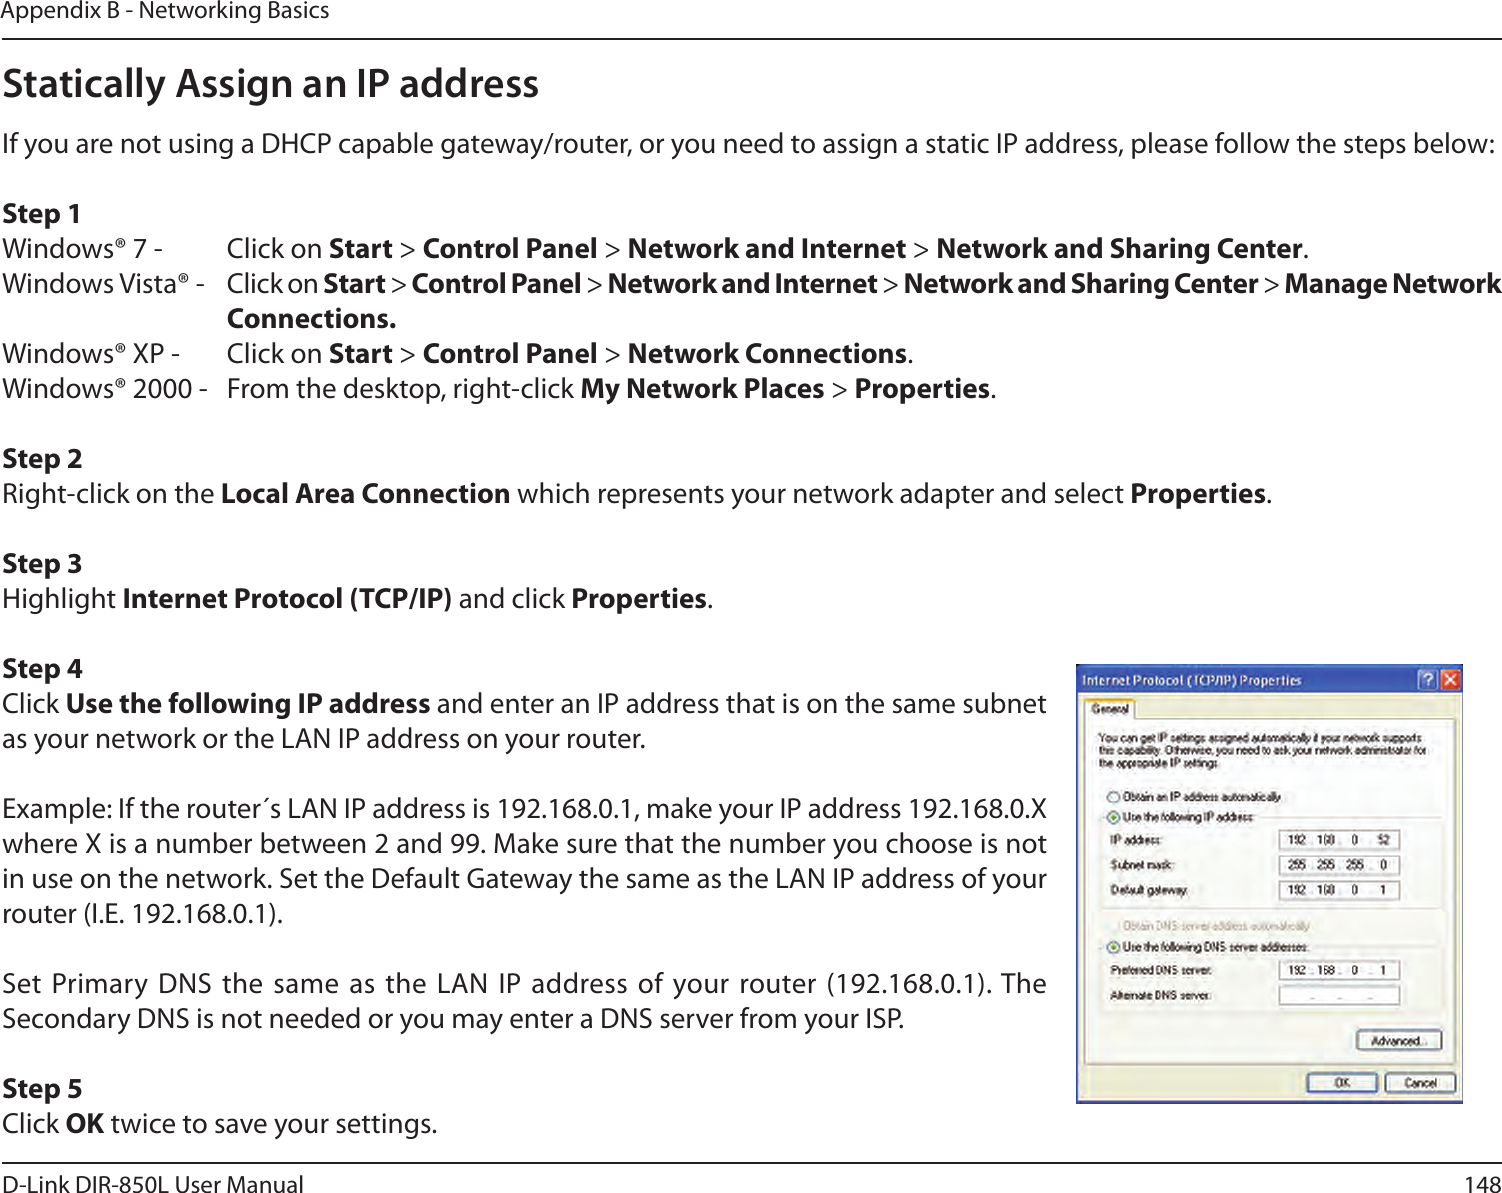 148D-Link DIR-850L User ManualAppendix B - Networking BasicsStatically Assign an IP addressIf you are not using a DHCP capable gateway/router, or you need to assign a static IP address, please follow the steps below:Step 1Windows® 7 -  Click on Start &gt; Control Panel &gt; Network and Internet &gt; Network and Sharing Center.Windows Vista® -  Click on Start &gt; Control Panel &gt; Network and Internet &gt; Network and Sharing Center &gt; Manage Network      Connections.Windows® XP -  Click on Start &gt; Control Panel &gt; Network Connections.Windows® 2000 -  From the desktop, right-click My Network Places &gt; Properties.Step 2Right-click on the Local Area Connection which represents your network adapter and select Properties.Step 3Highlight Internet Protocol (TCP/IP) and click Properties.Step 4Click Use the following IP address and enter an IP address that is on the same subnet as your network or the LAN IP address on your router. Example: If the router´s LAN IP address is 192.168.0.1, make your IP address 192.168.0.X where X is a number between 2 and 99. Make sure that the number you choose is not in use on the network. Set the Default Gateway the same as the LAN IP address of your router (I.E. 192.168.0.1). Set Primary DNS the same as the LAN IP address of  your router (192.168.0.1). The Secondary DNS is not needed or you may enter a DNS server from your ISP.Step 5Click OK twice to save your settings.